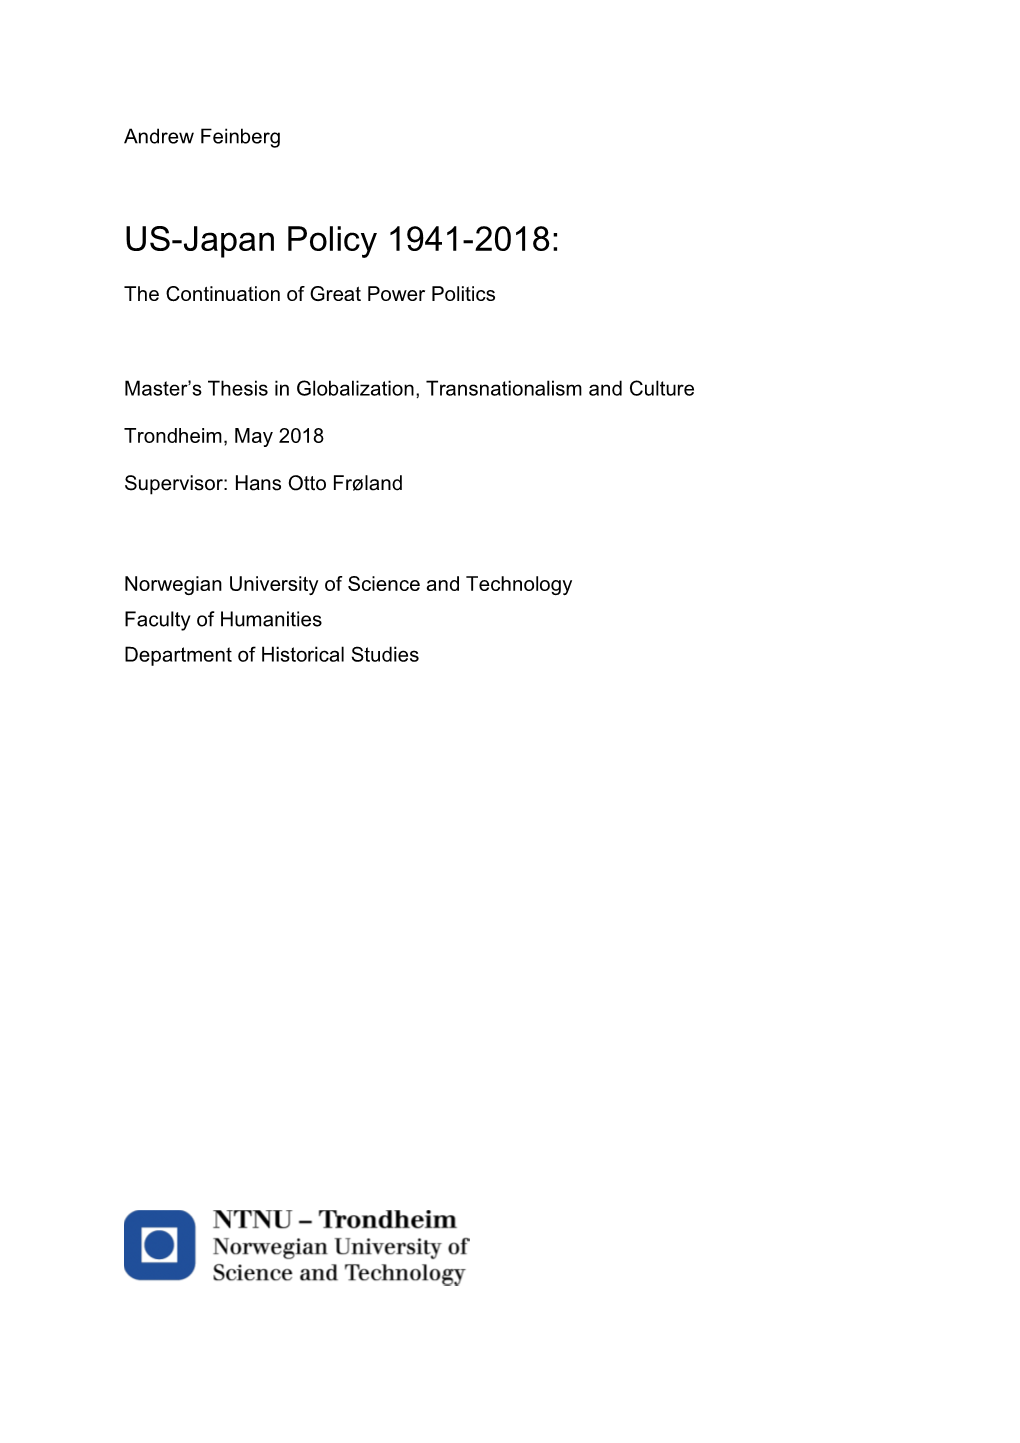 US-Japan Policy 1941-2018